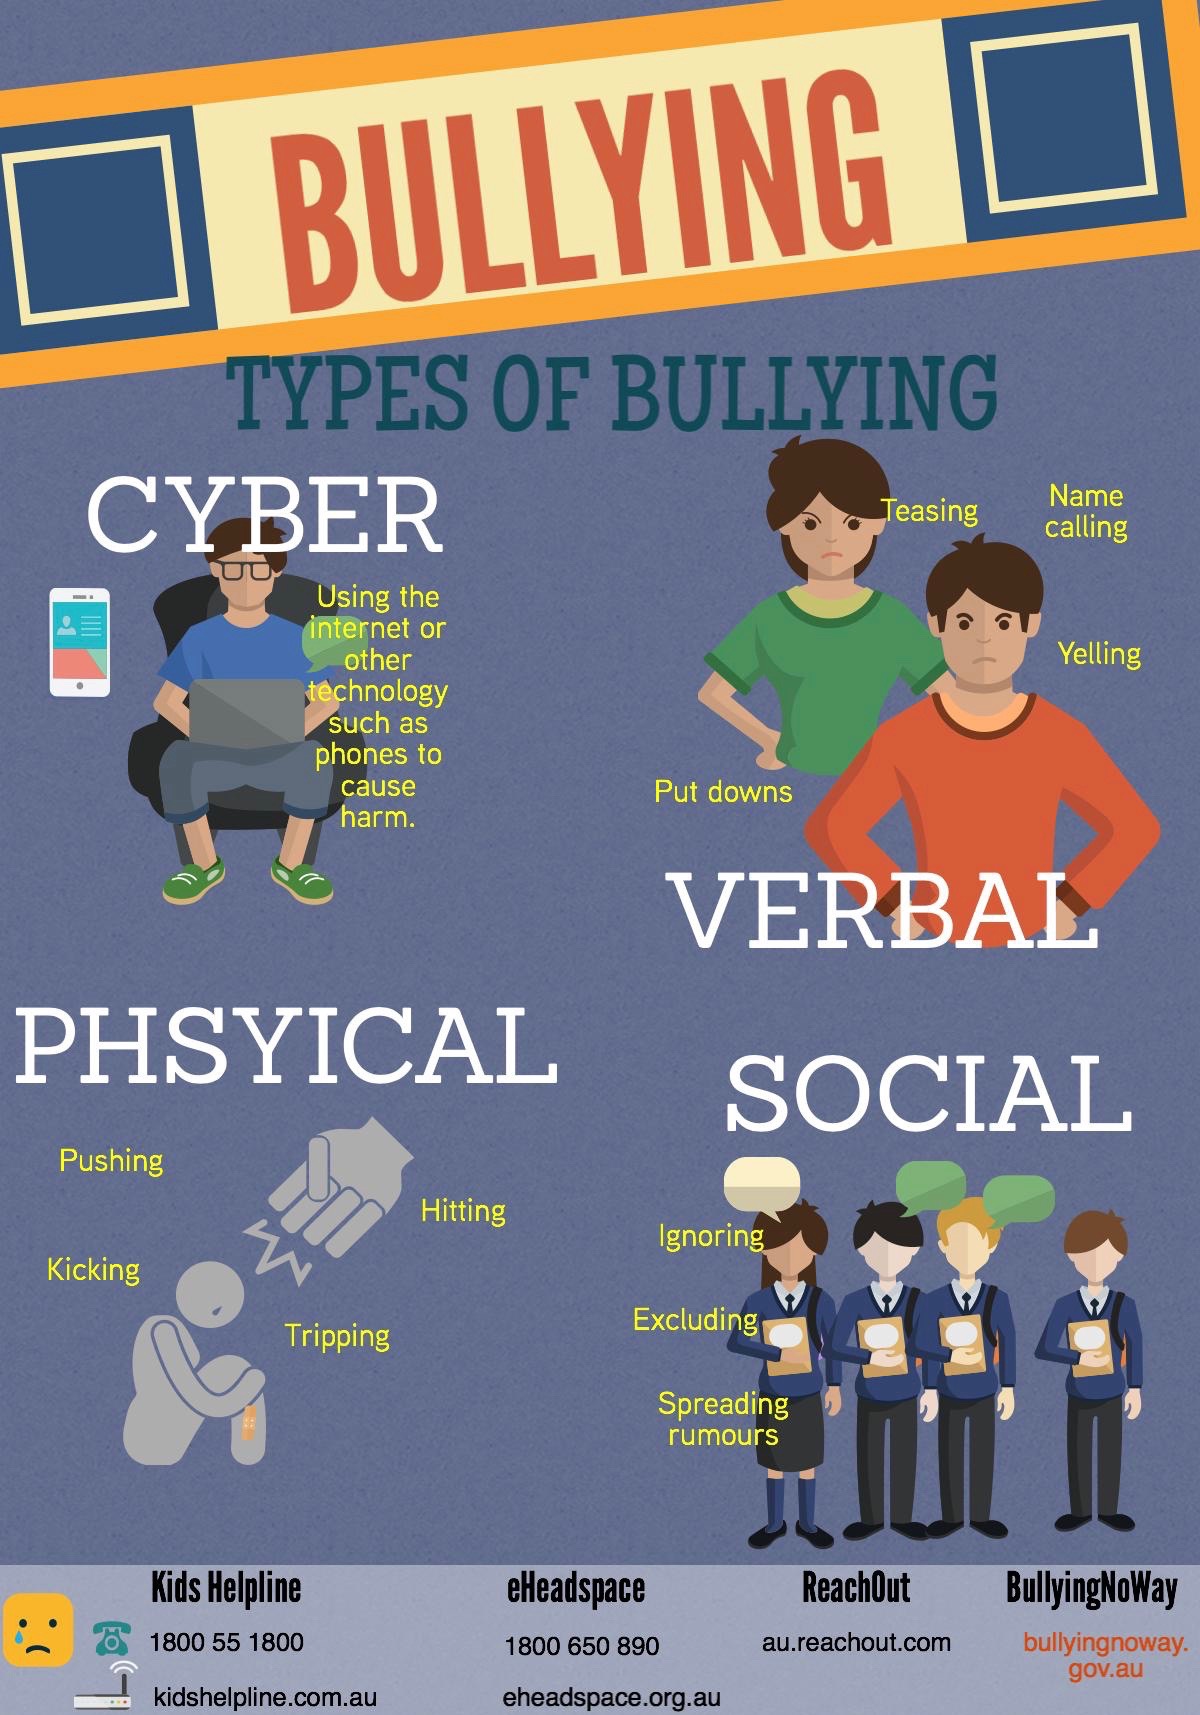 Bullying - ReachOut Forums - 175548